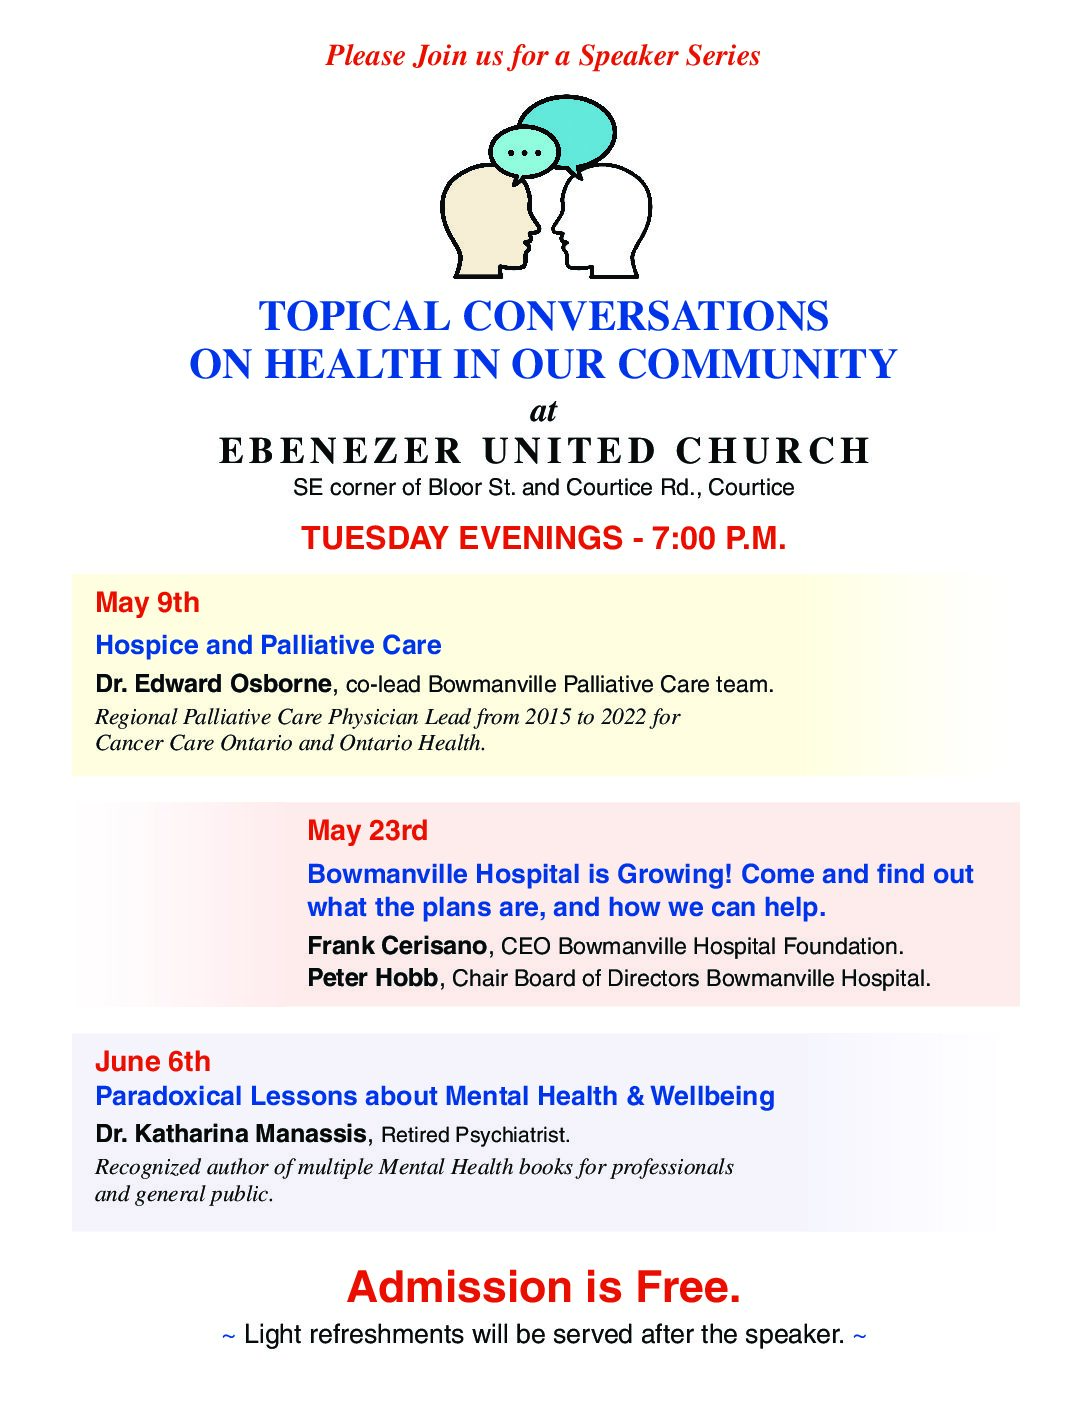 Topical Conversations on Health in our Community at Ebenezer United Church